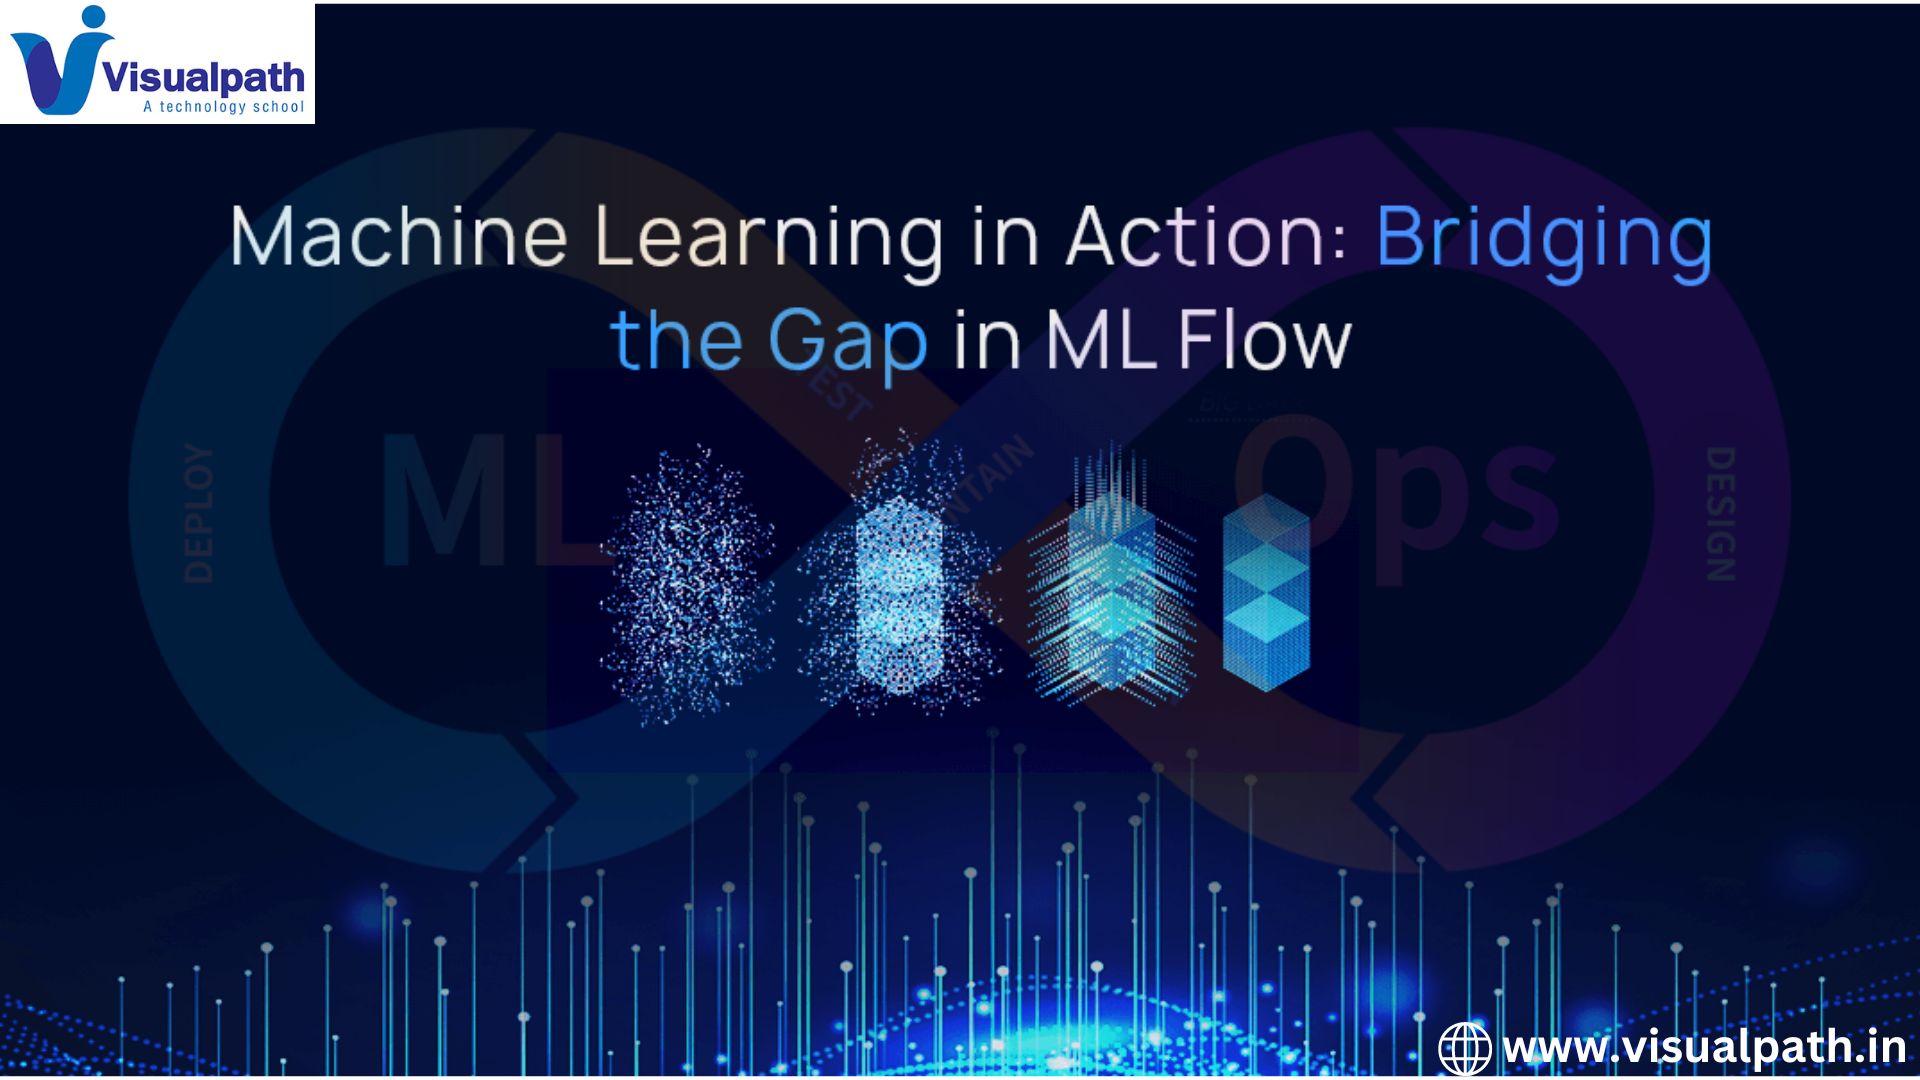 The Future of MLOps: Bridging the Gap Between Data Science and Production